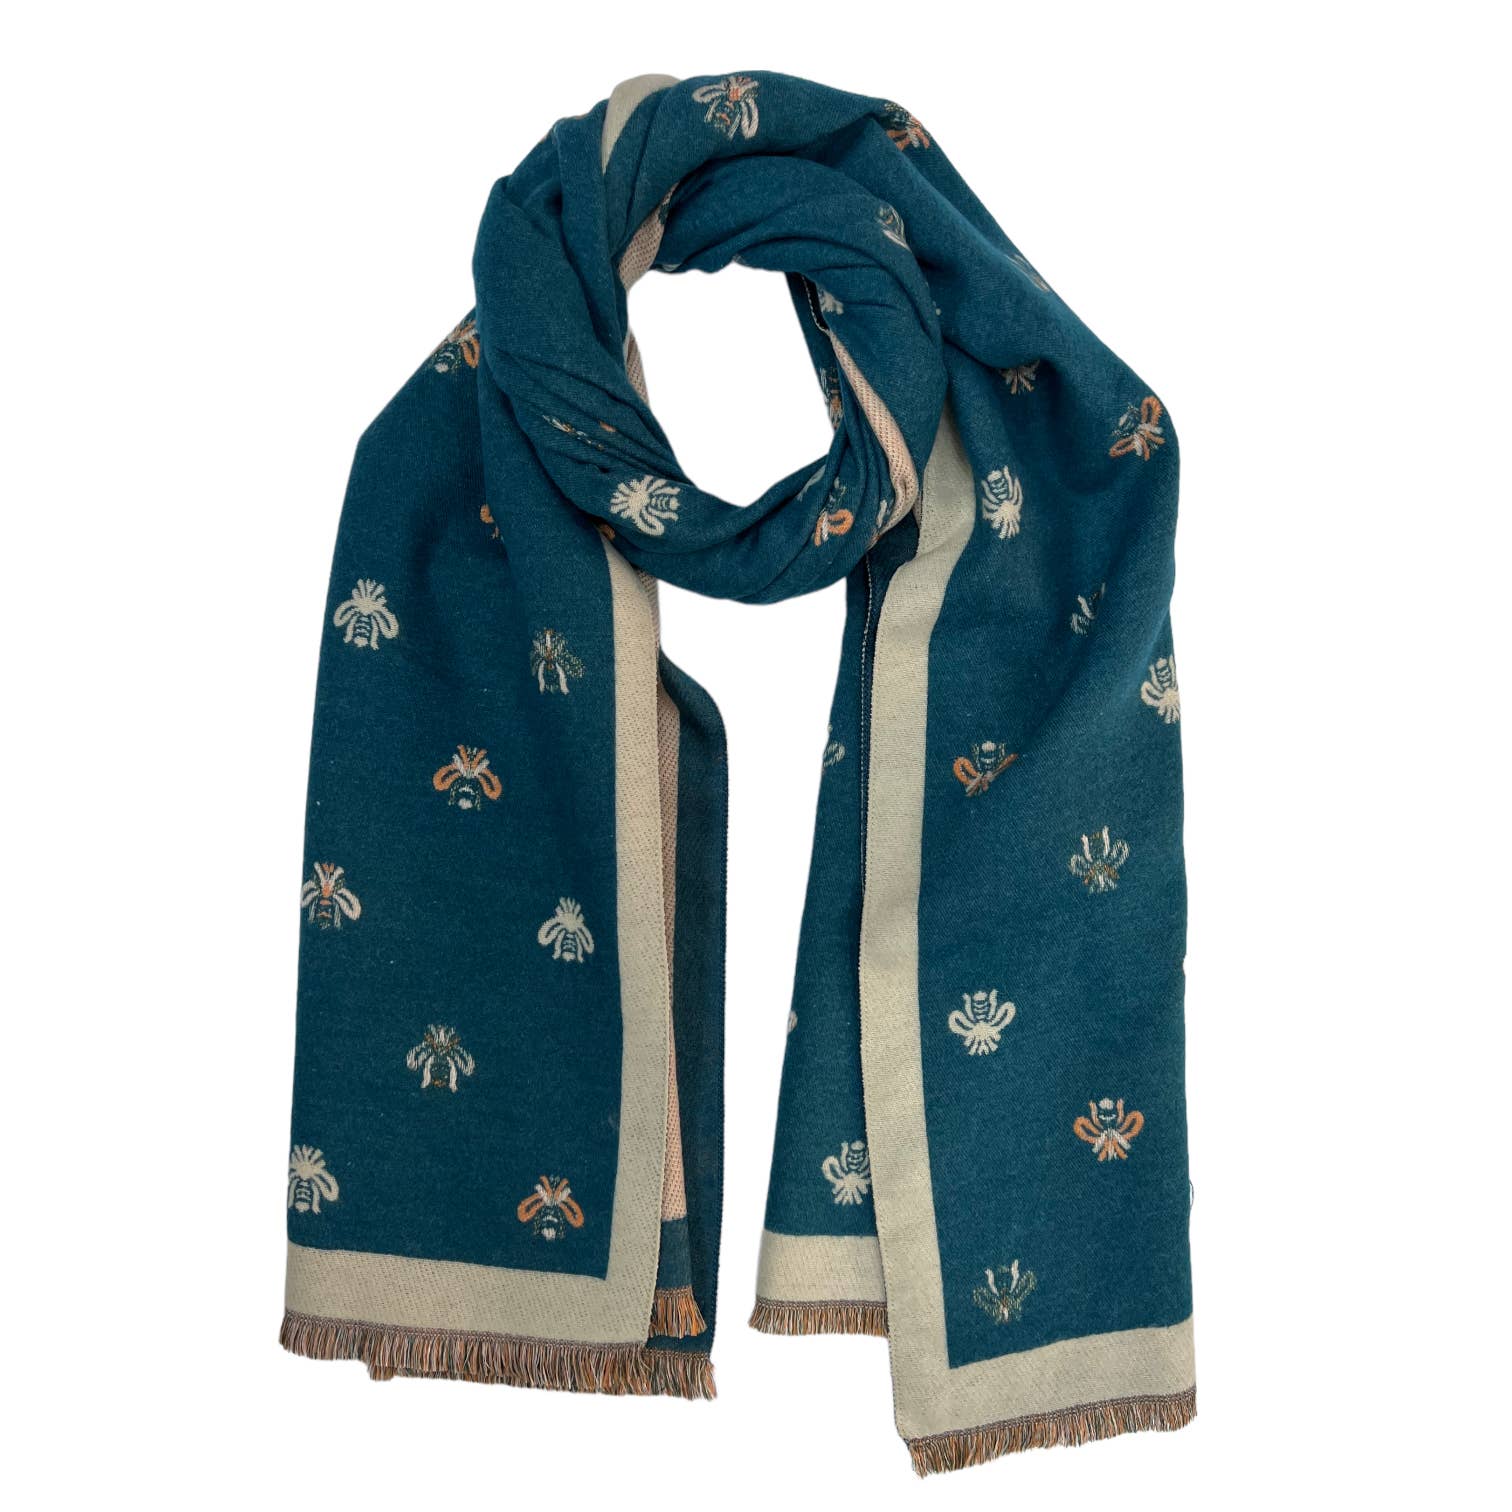 Scarf, Reversible Bee Print Cashmere Blend, Teal